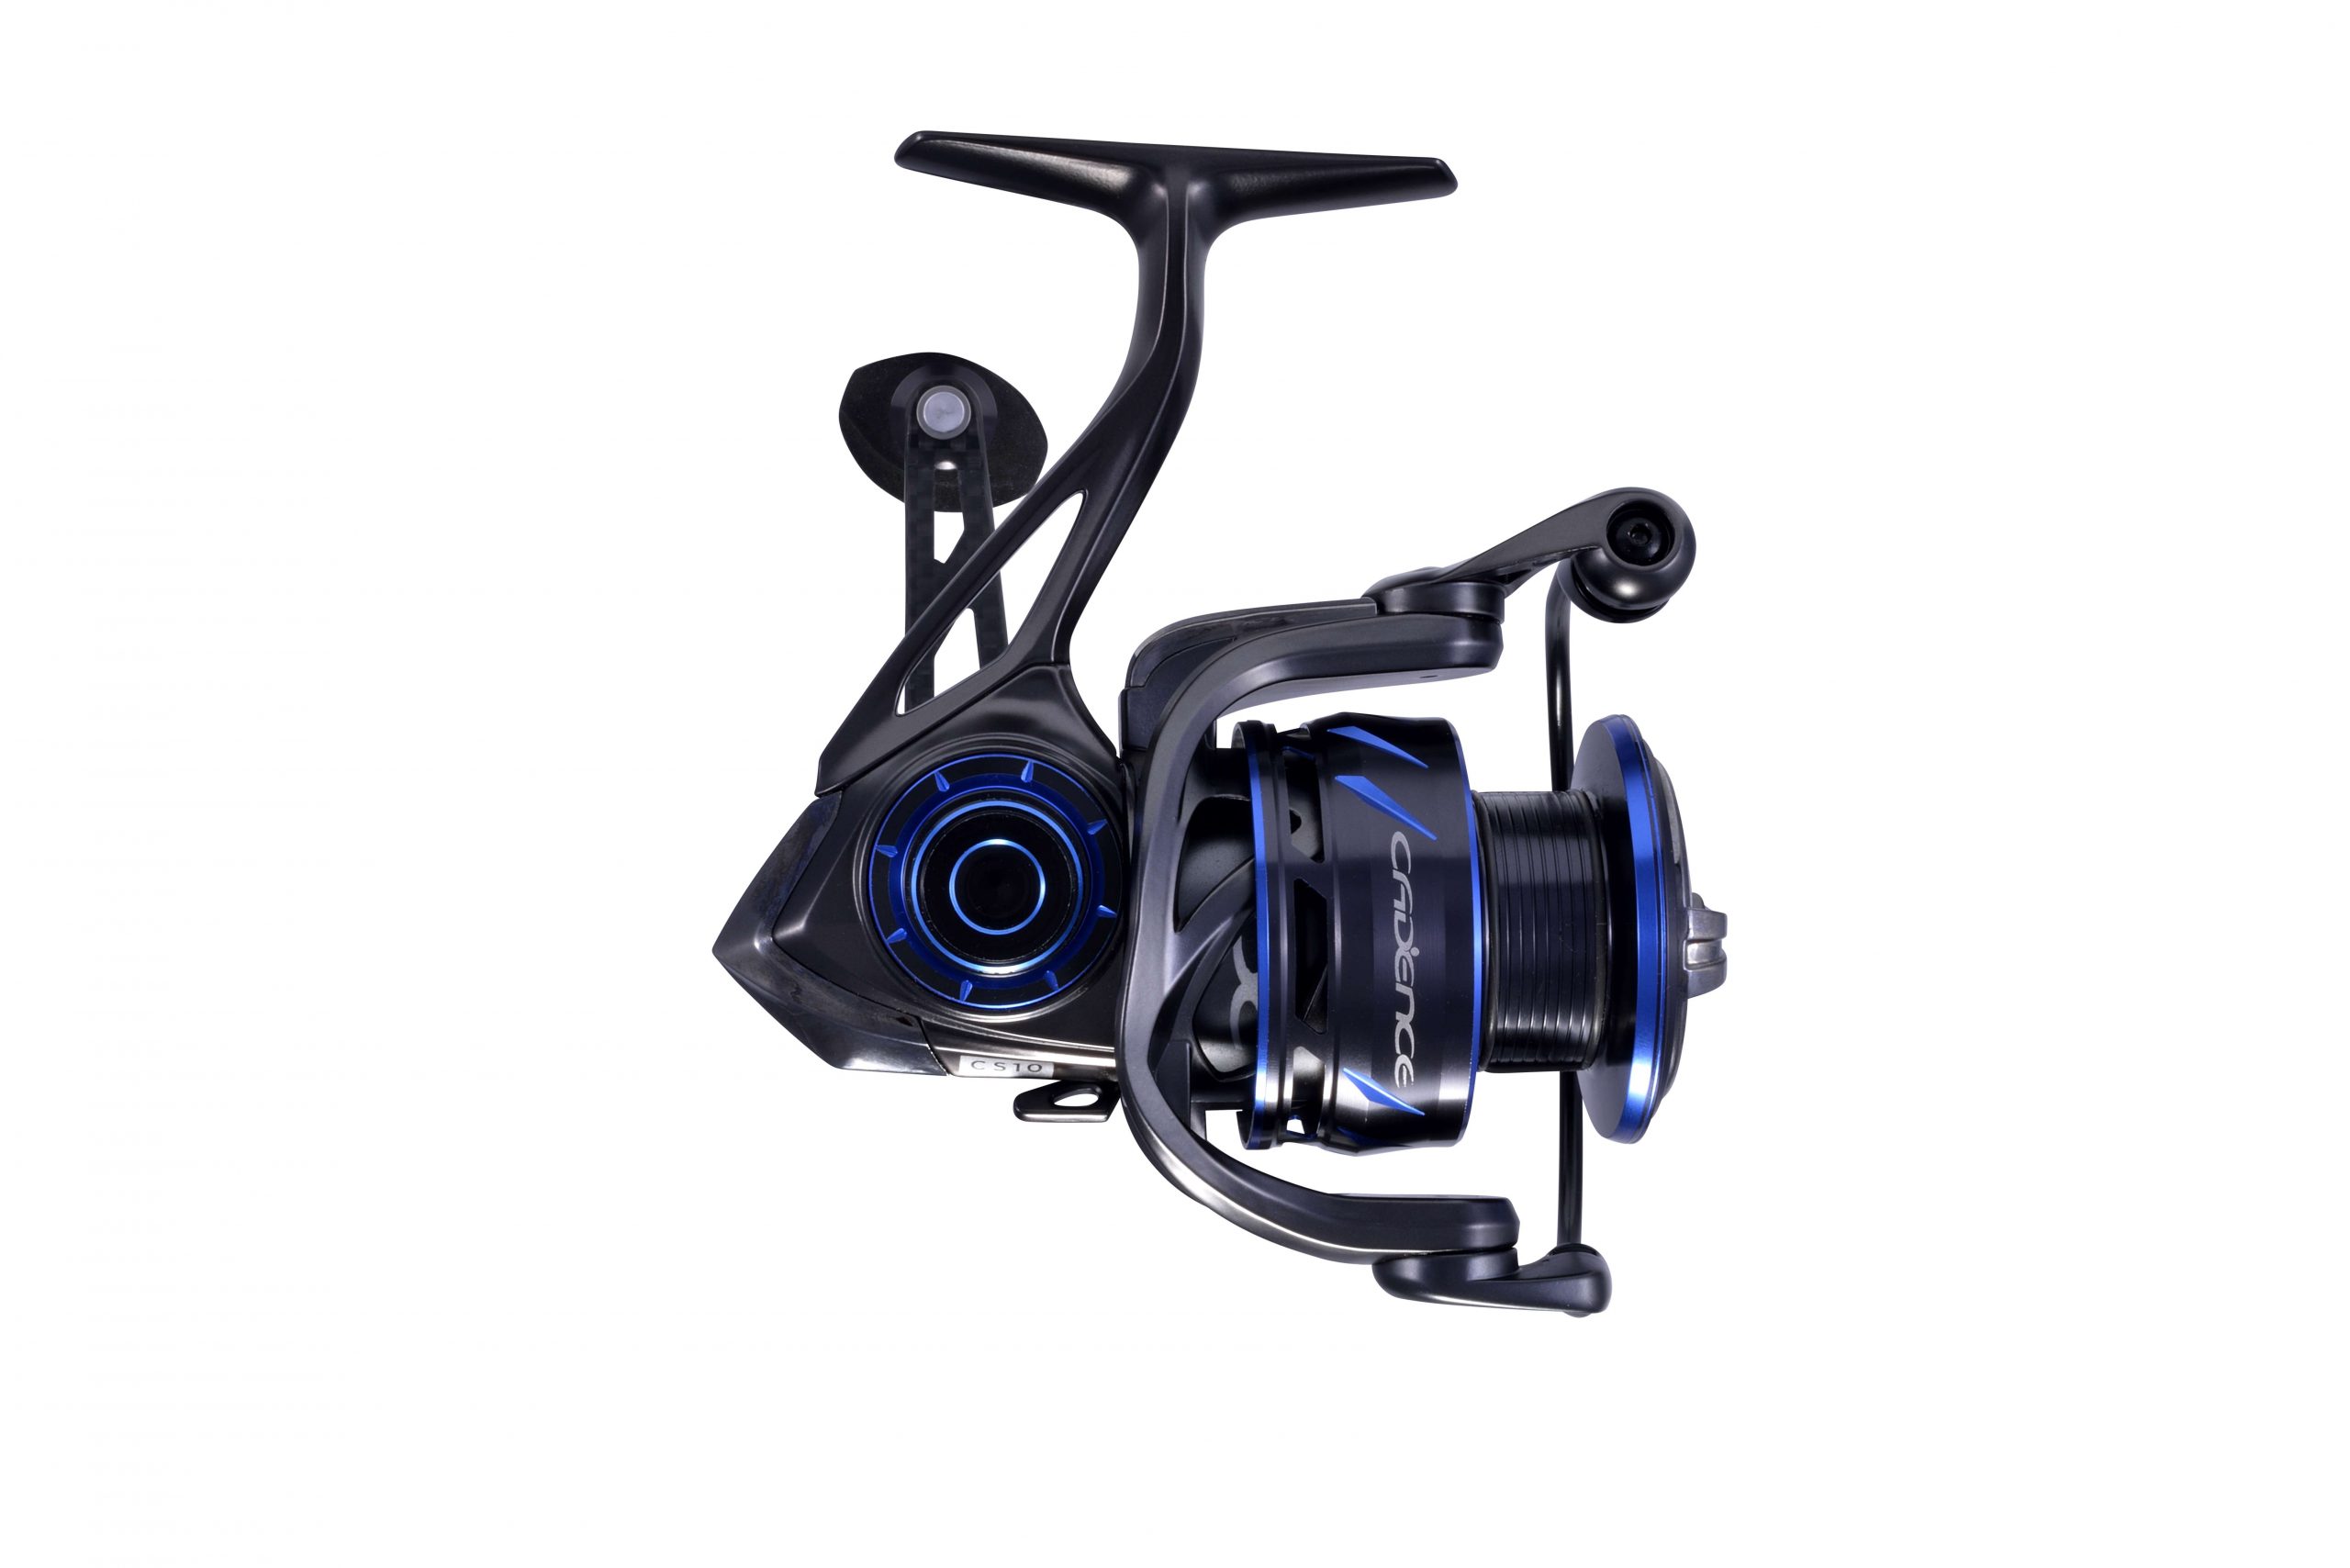 CS10 Spinning Reel<br>
Cadence<br>
$119.99<br>
The Cadence CS10 is engineered to deliver a premium reel at a higher value than competitors. The ultra-lightweight spinning reel design is made possible by its lightweight magnesium frame, spinning a lighter carbon rotor all gliding on 11 corrosion resistant bearings. The braid ready aluminum spool houses a carbon fiber drag system that delivers even pressure, and the carbon handle with ergonomic EVA knob provides even smoother handling.	